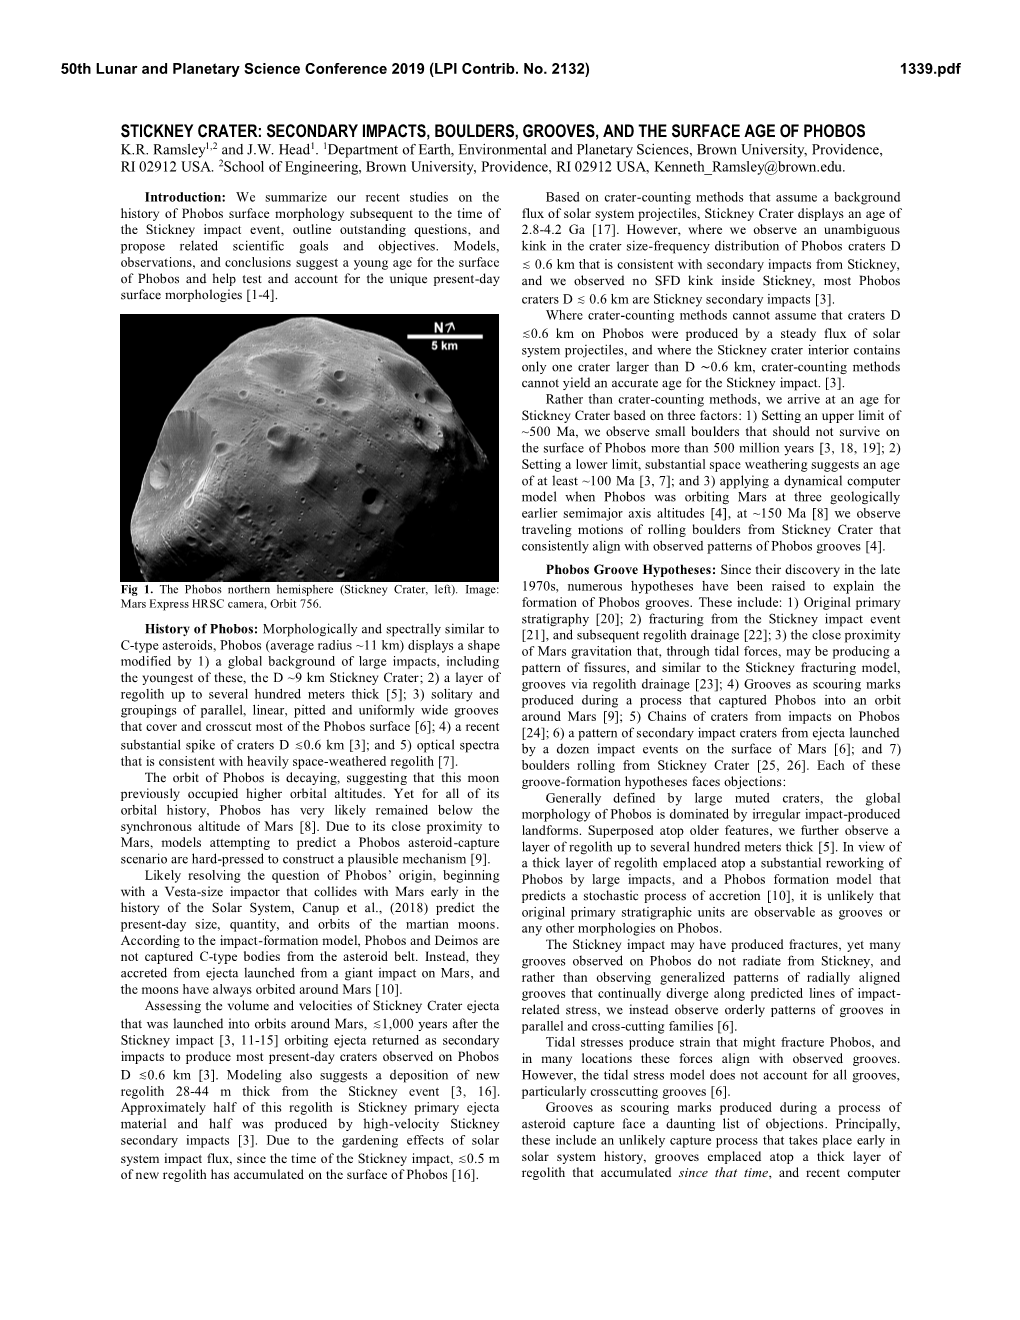 Stickney Crater: Secondary Impacts, Boulders, Grooves, and the Surface Age of Phobos K.R